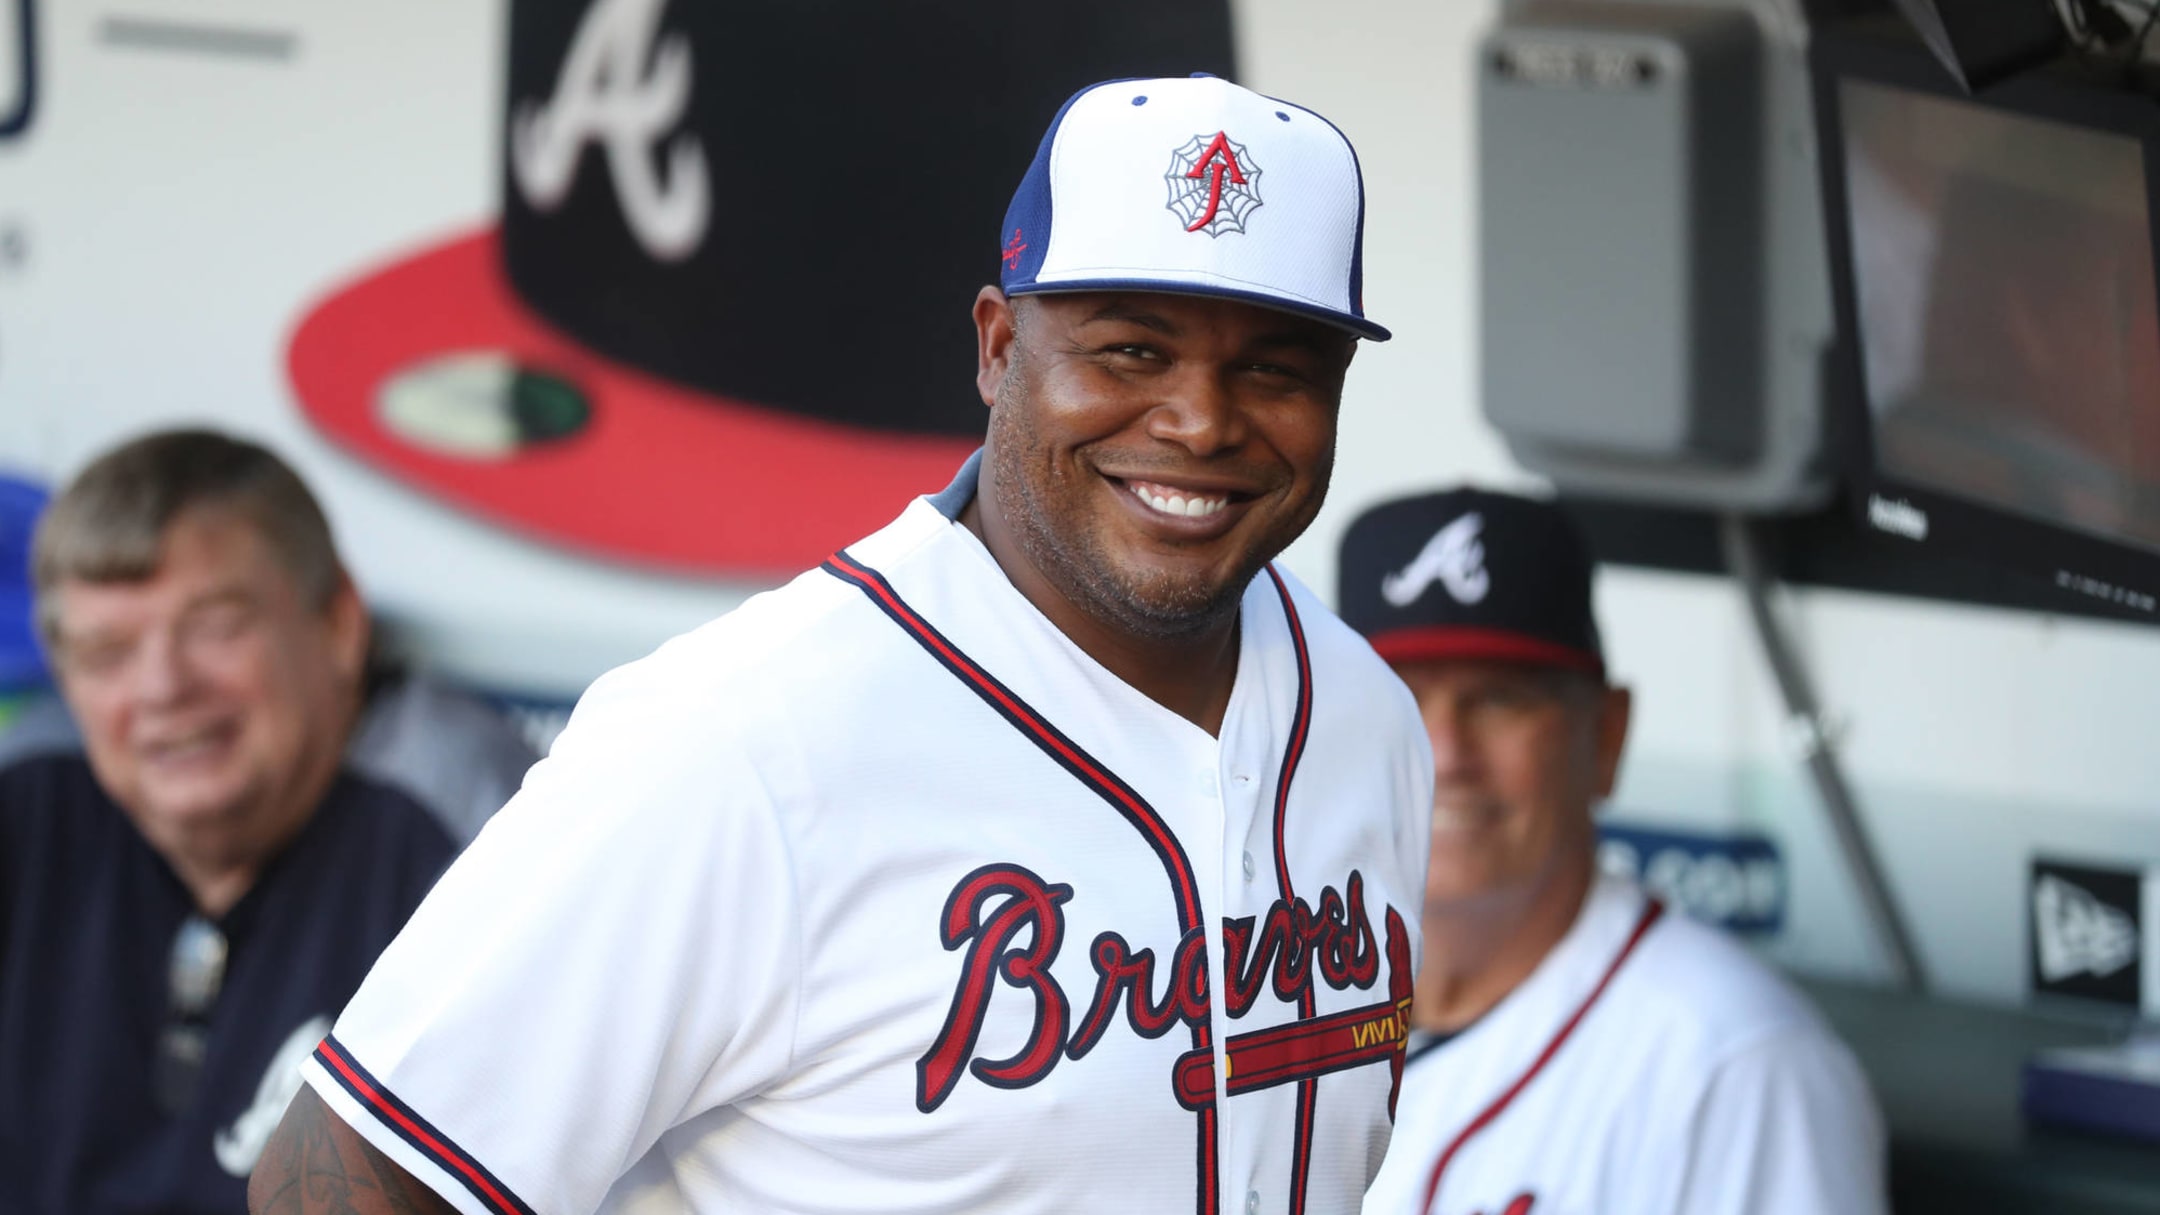 Video Of Former MLB Star Andruw Jones' Son Hitting A HR Going Viral - The  Spun: What's Trending In The Sports World Today